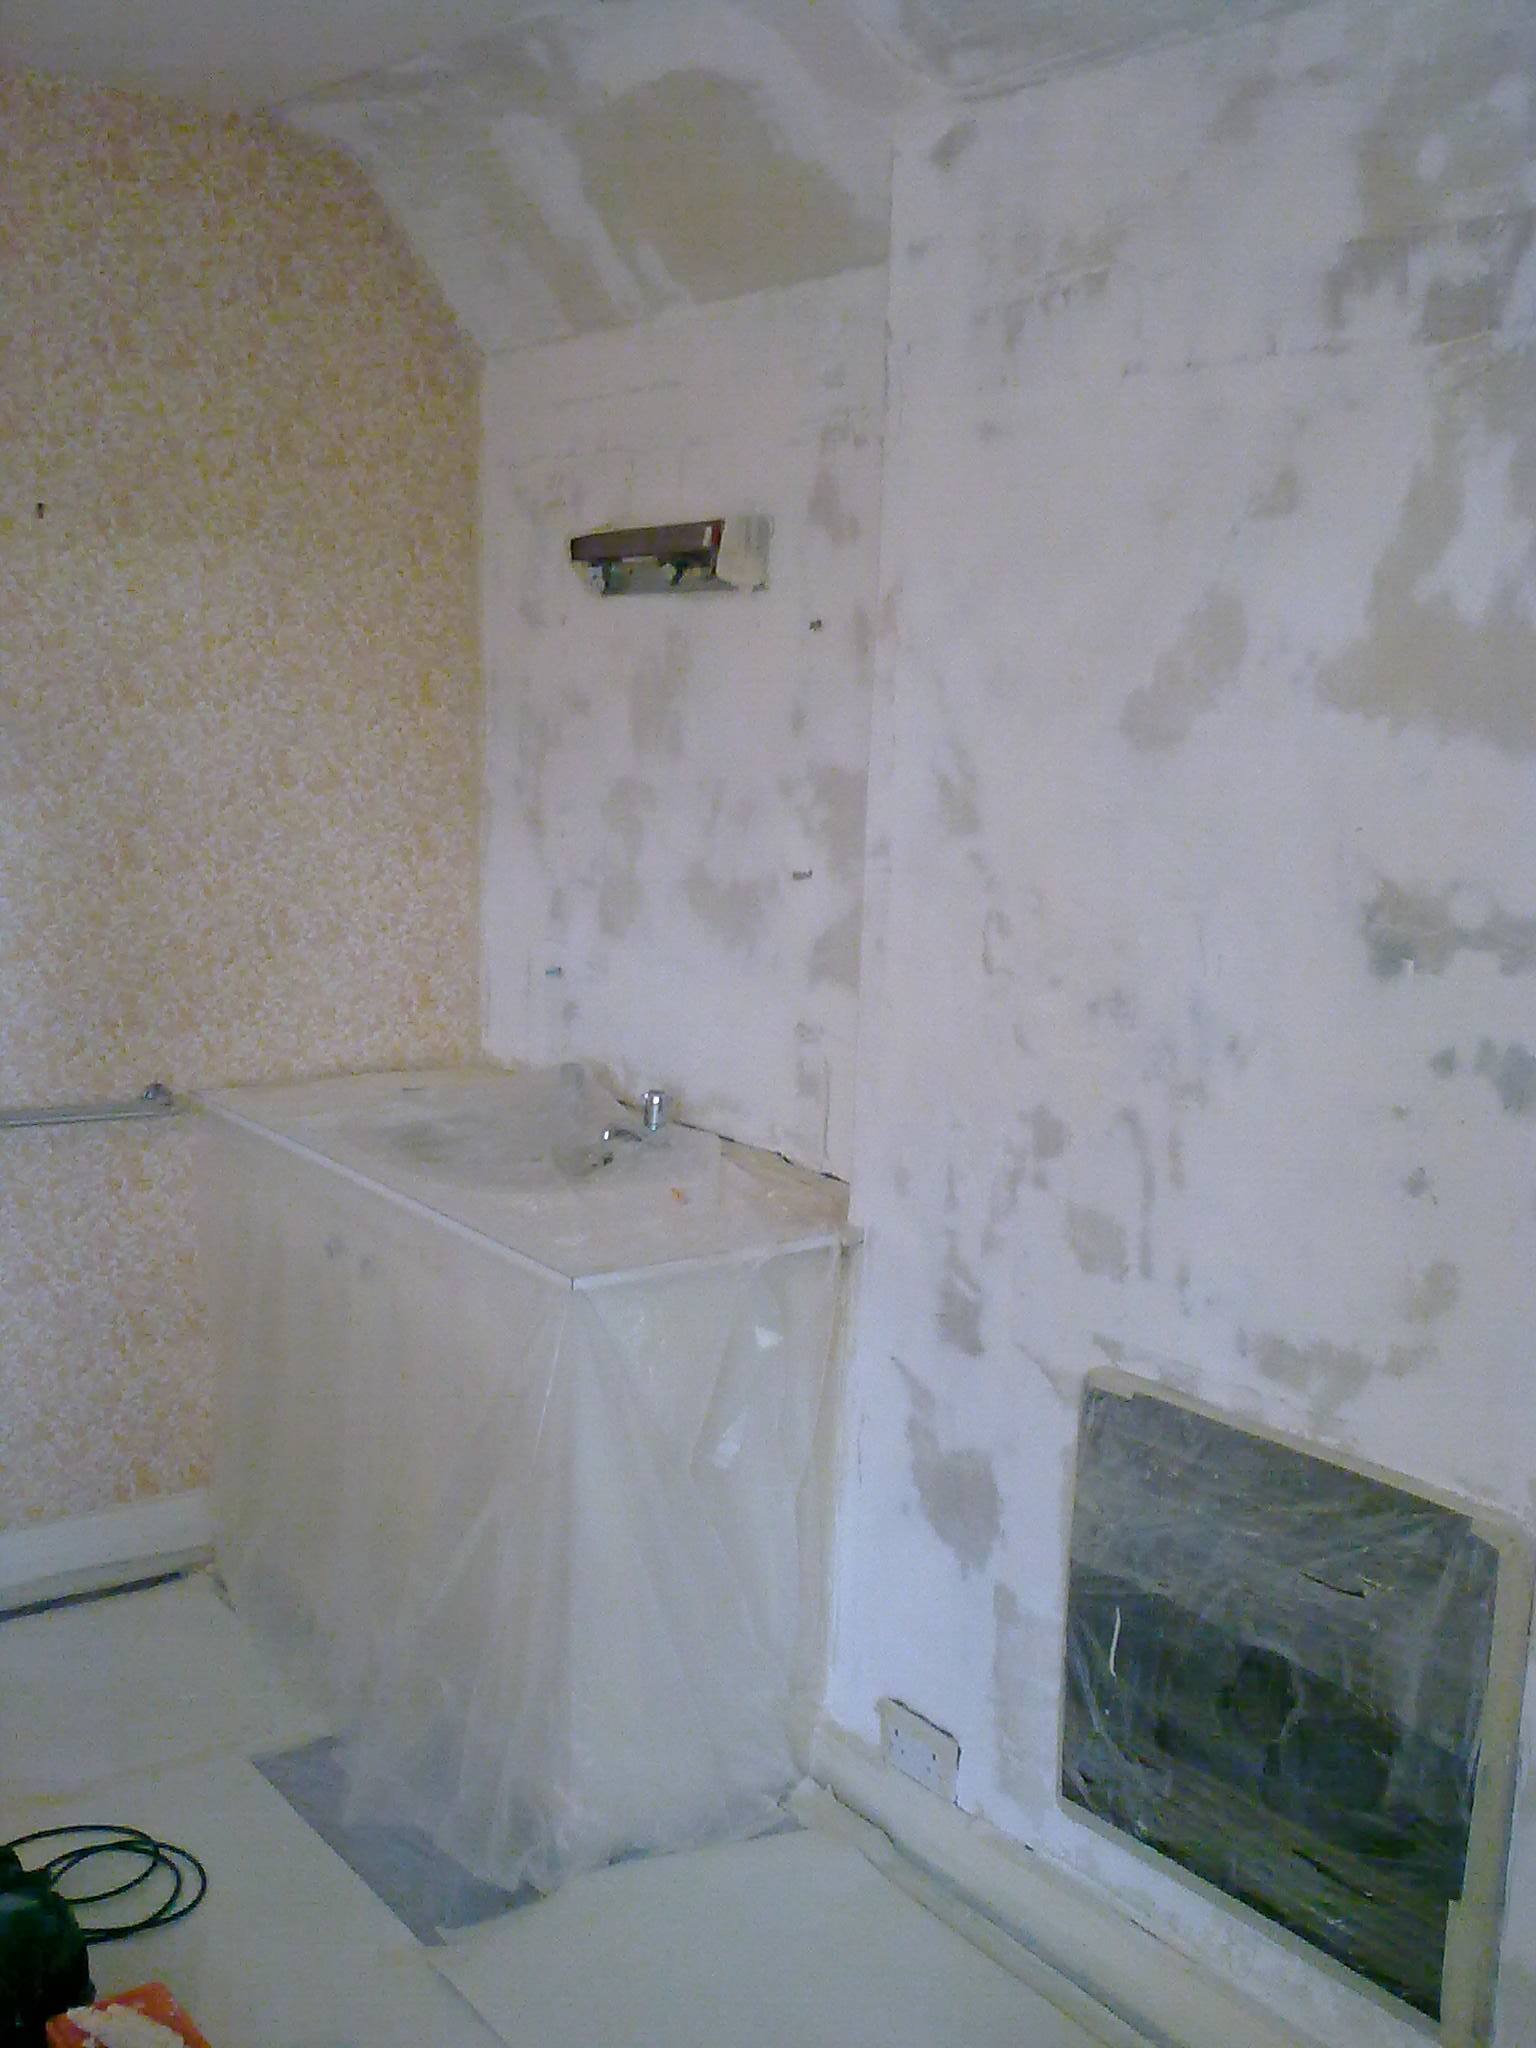 Painting Over Wallpaper Lining Paper Could Paint Surface Of